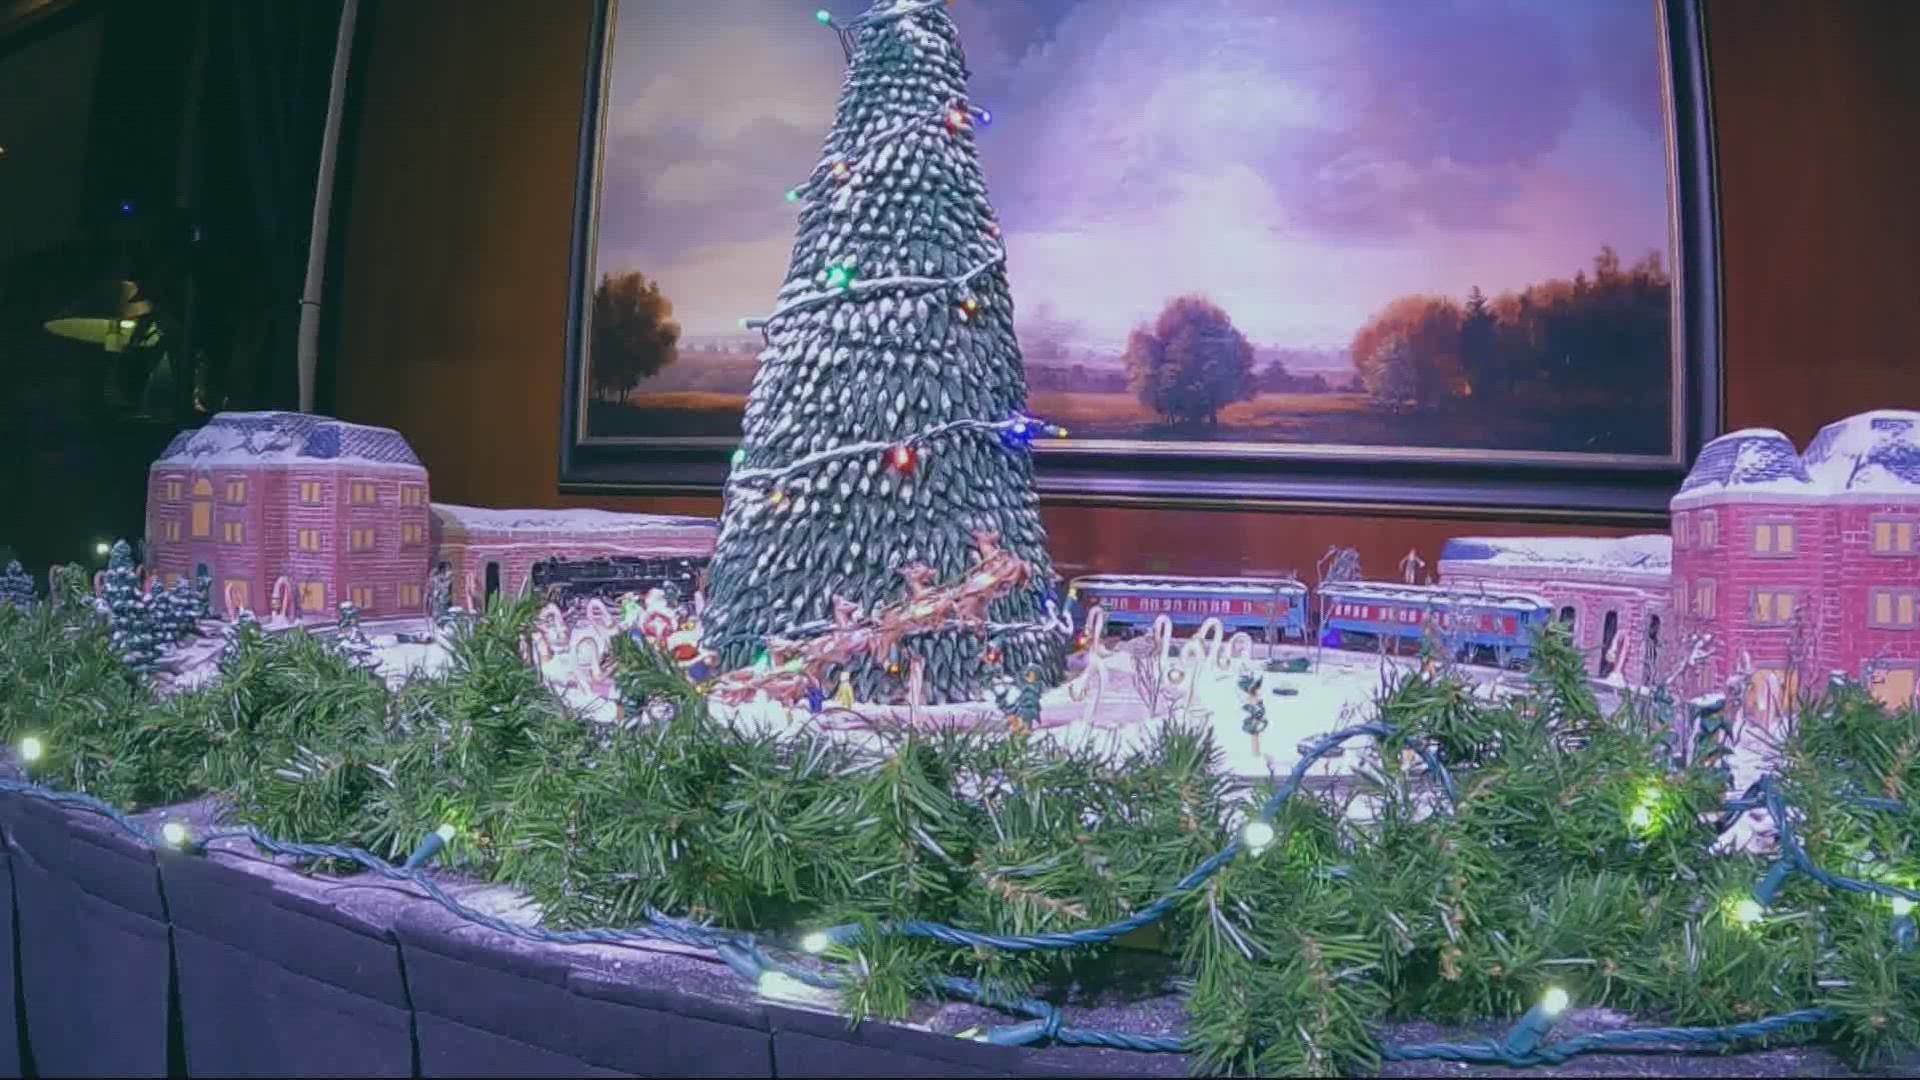 The display is decked out in a "Polar Express" theme this year, but the real showstopper was the edible Christmas tree.